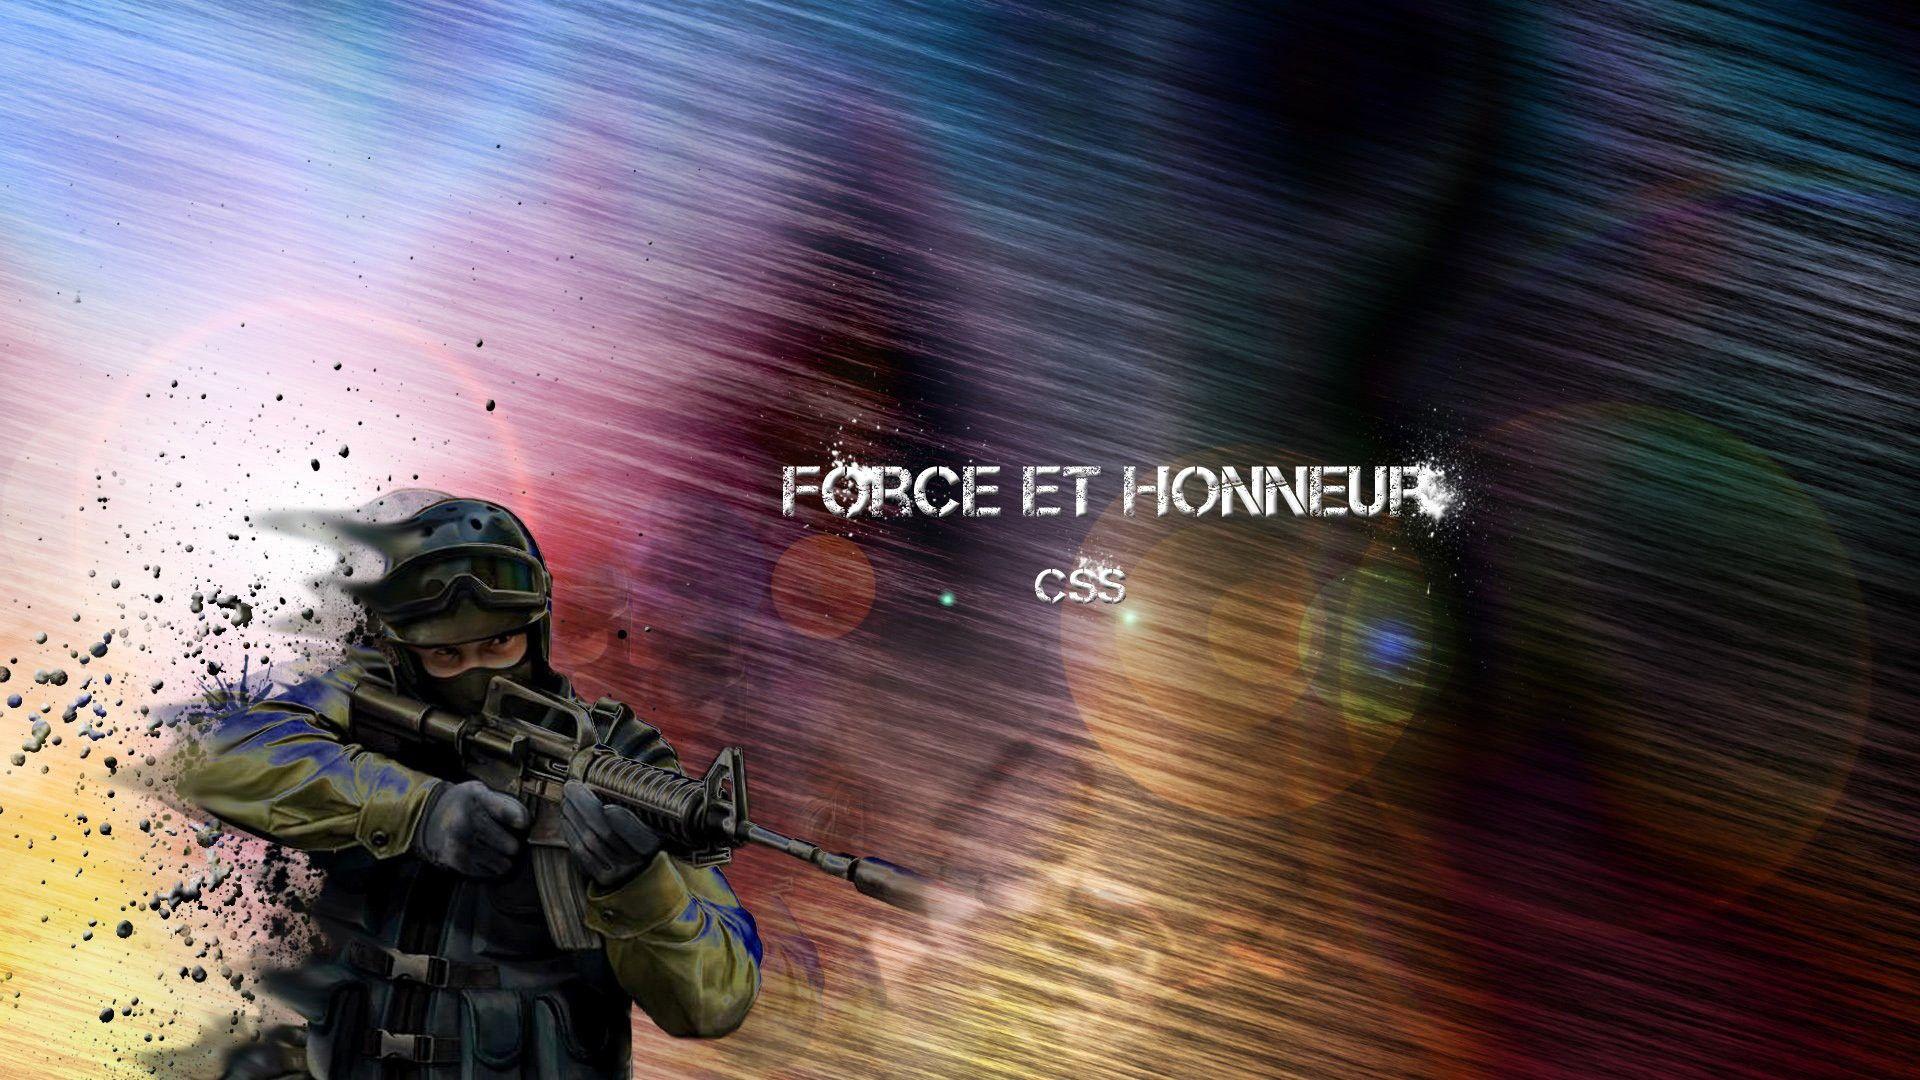 Games: Counter Strike Source Free Wallpaper 1920x1080 For HD 16:9